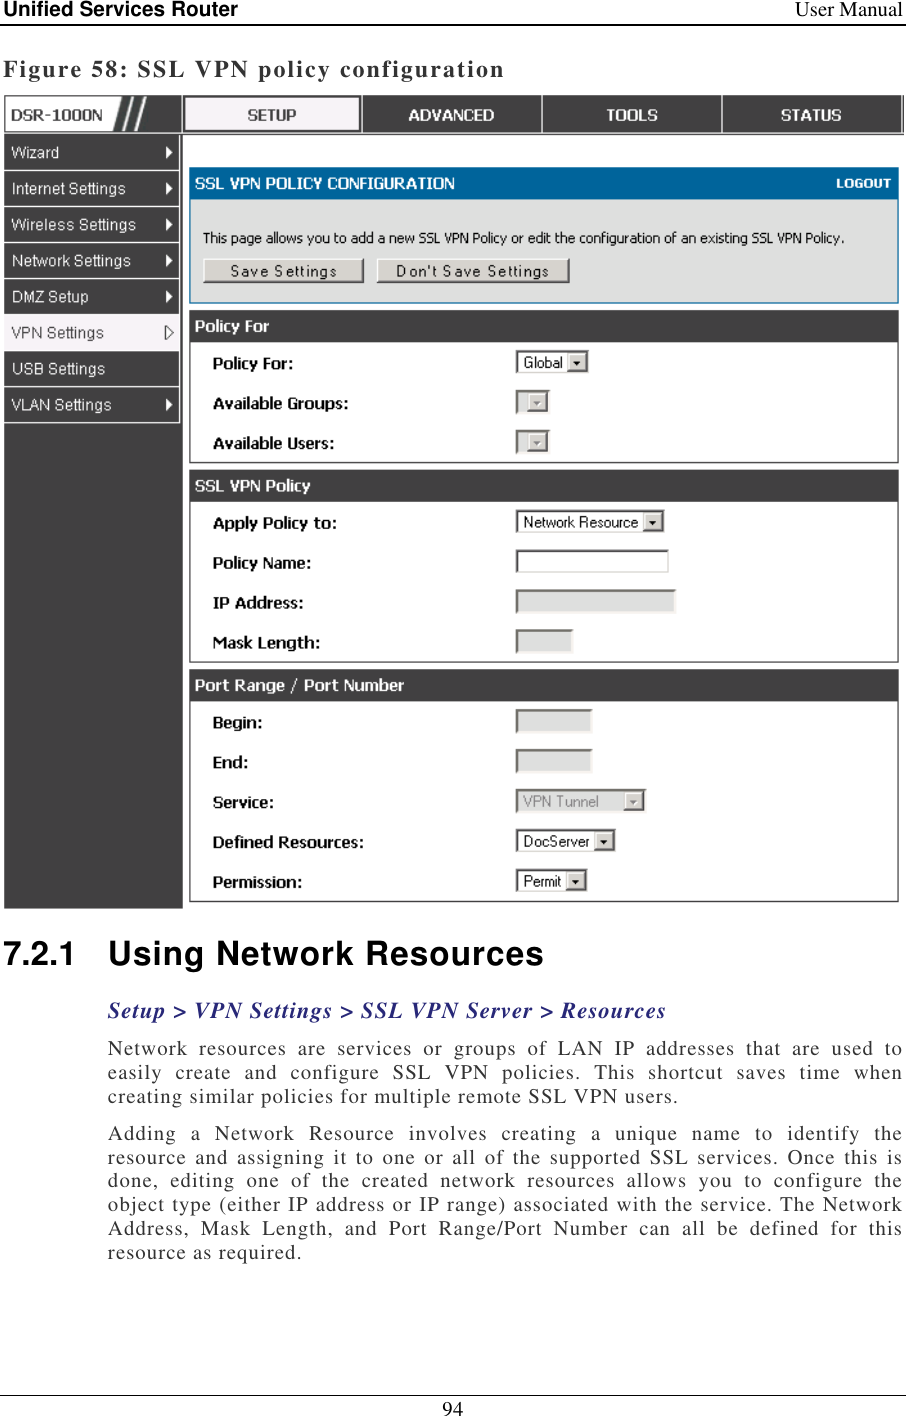 Unified Services Router    User Manual 94  Figure 58: SSL VPN policy configuration  7.2.1  Using Network Resources  Setup &gt; VPN Settings &gt; SSL VPN Server &gt; Resources Network  resources  are  services  or  groups  of  LAN  IP  addresses  that  are  used  to easily  create  and  configure  SSL  VPN  policies.  This  shortcut  saves  time  when creating similar policies for multiple remote SSL VPN users.  Adding  a  Network  Resource  involves  creating  a  unique  name  to  identify  the resource  and  assigning  it  to one or  all  of  the  supported  SSL  services.  Once  this  is done,  editing  one  of  the  created  network  resources  allows  you  to  configure  the object type (either IP address or IP range) associated with the service. The Network Address,  Mask  Length,  and  Port  Range/Port  Number  can  all  be  defined  for  this resource as required.  